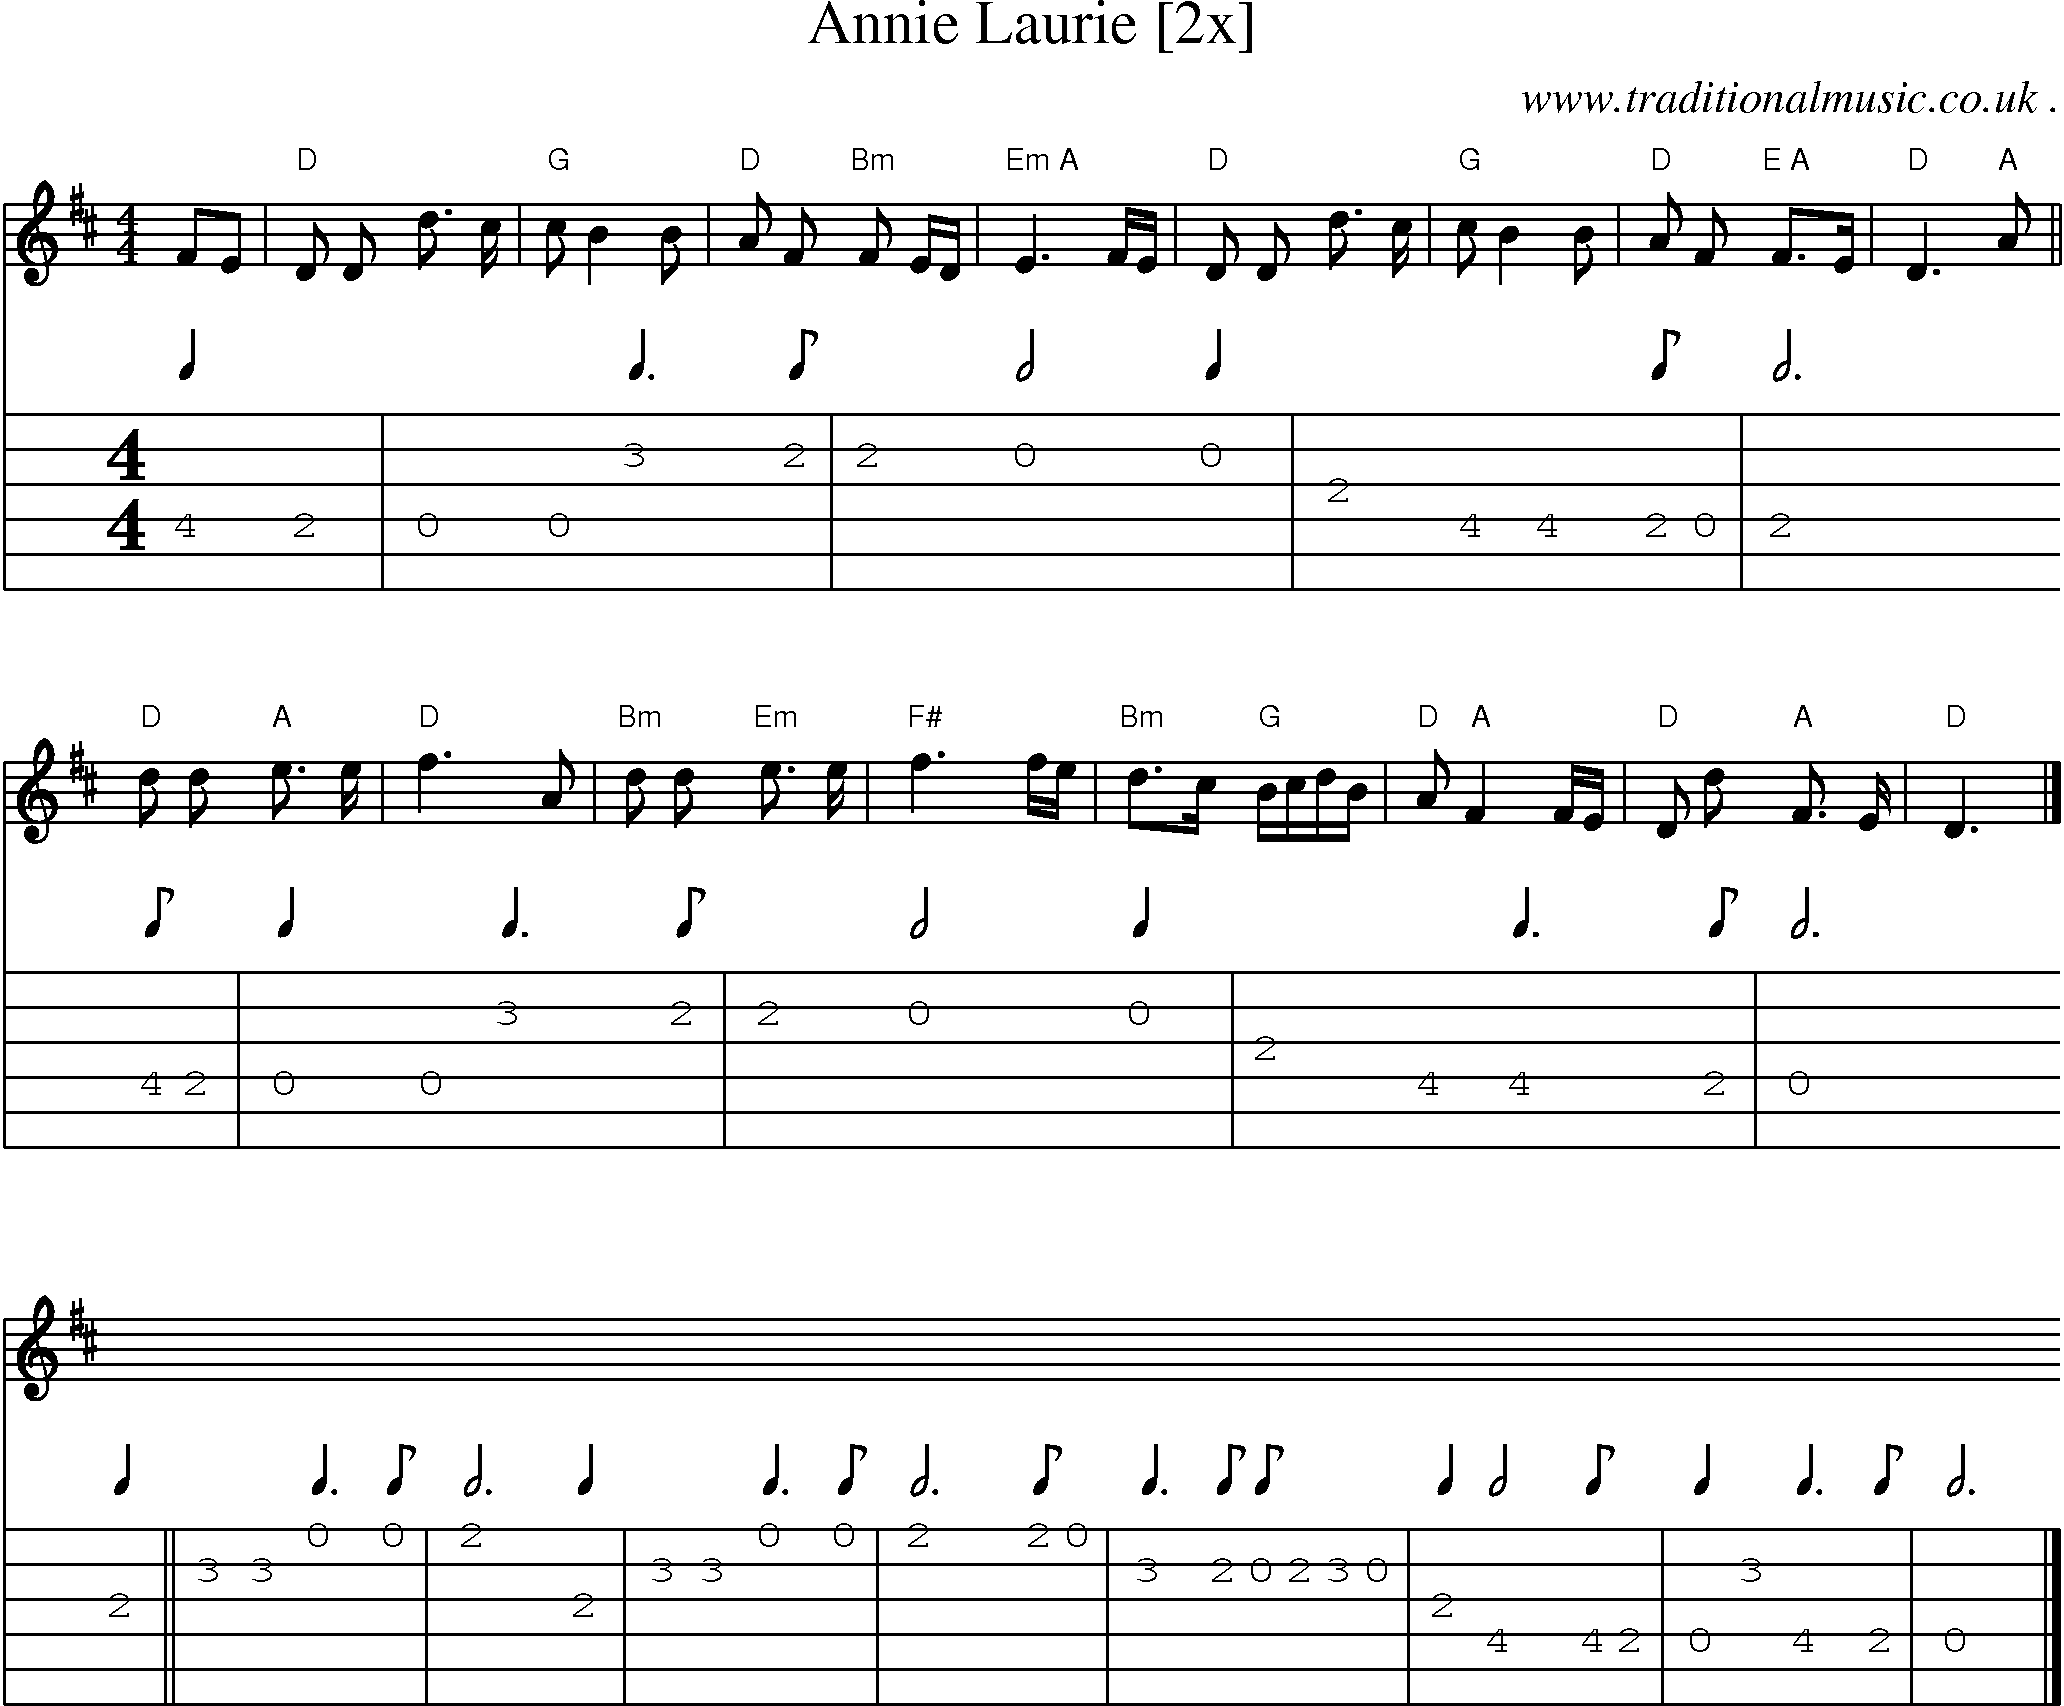 Sheet-music  score, Chords and Guitar Tabs for Annie Laurie [2x]